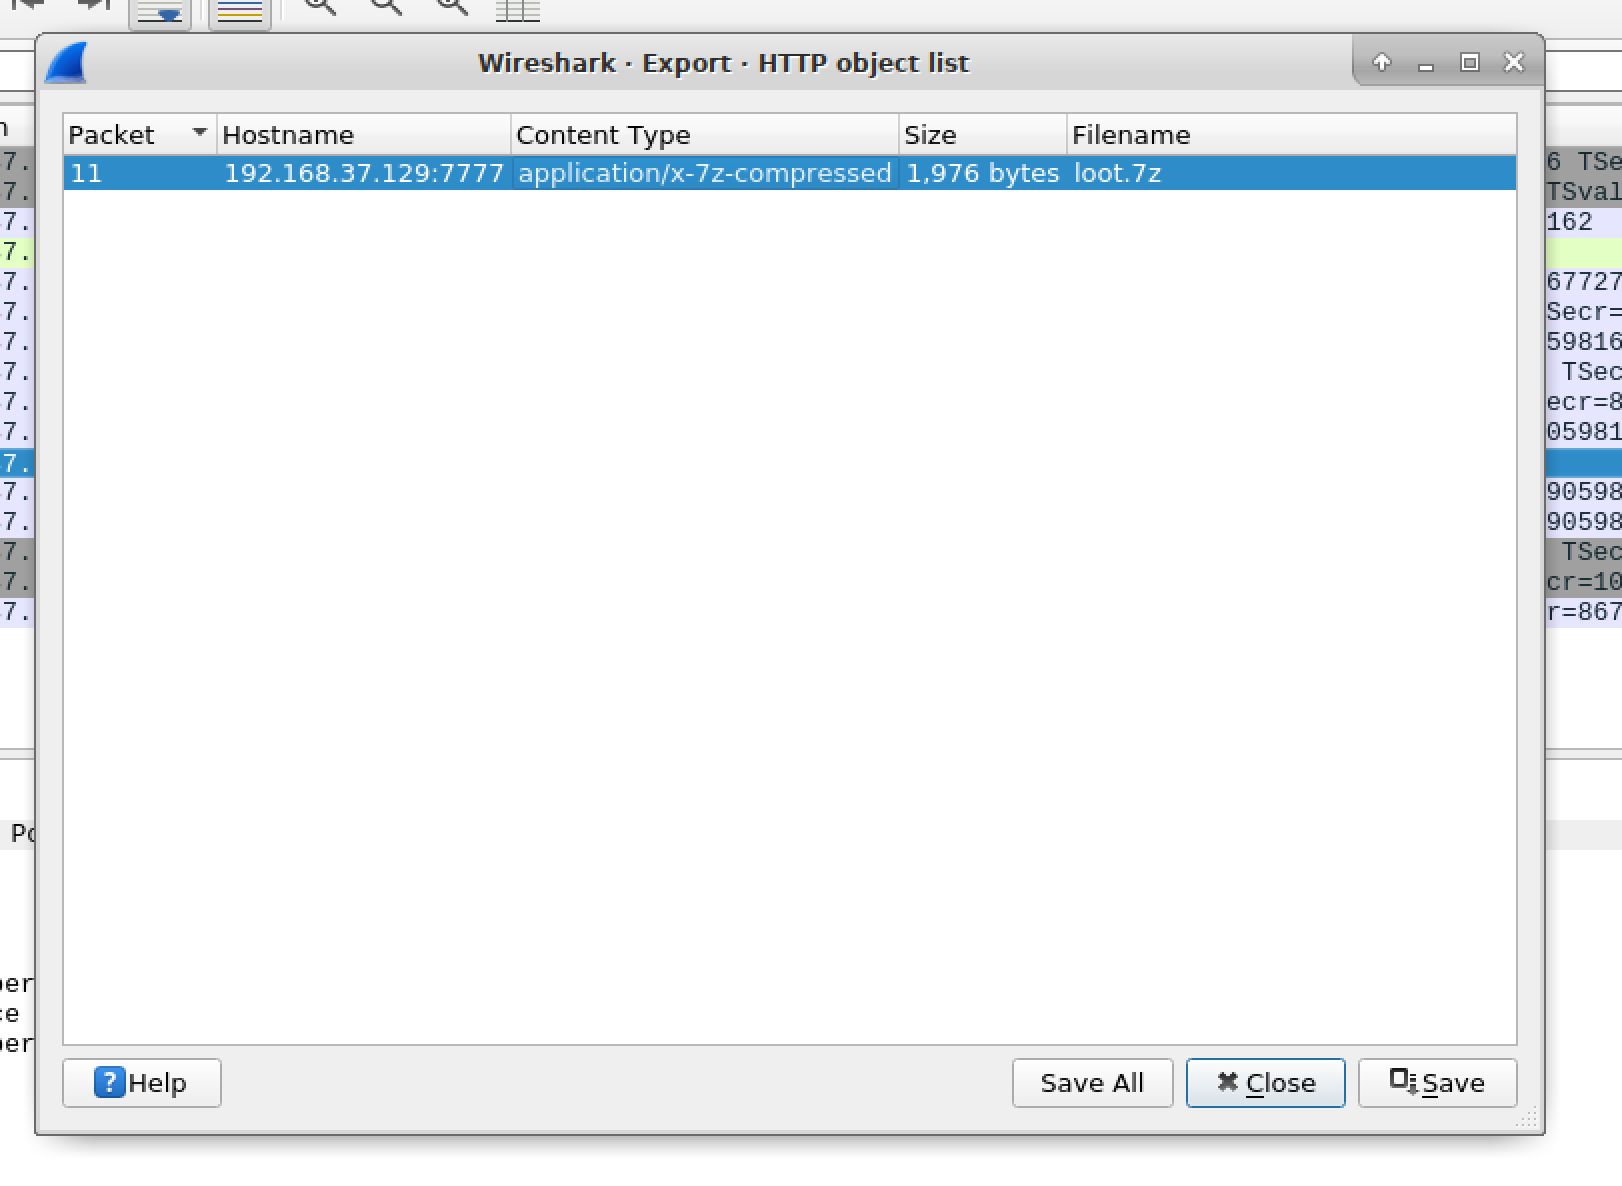 Exporting Wireshark objects